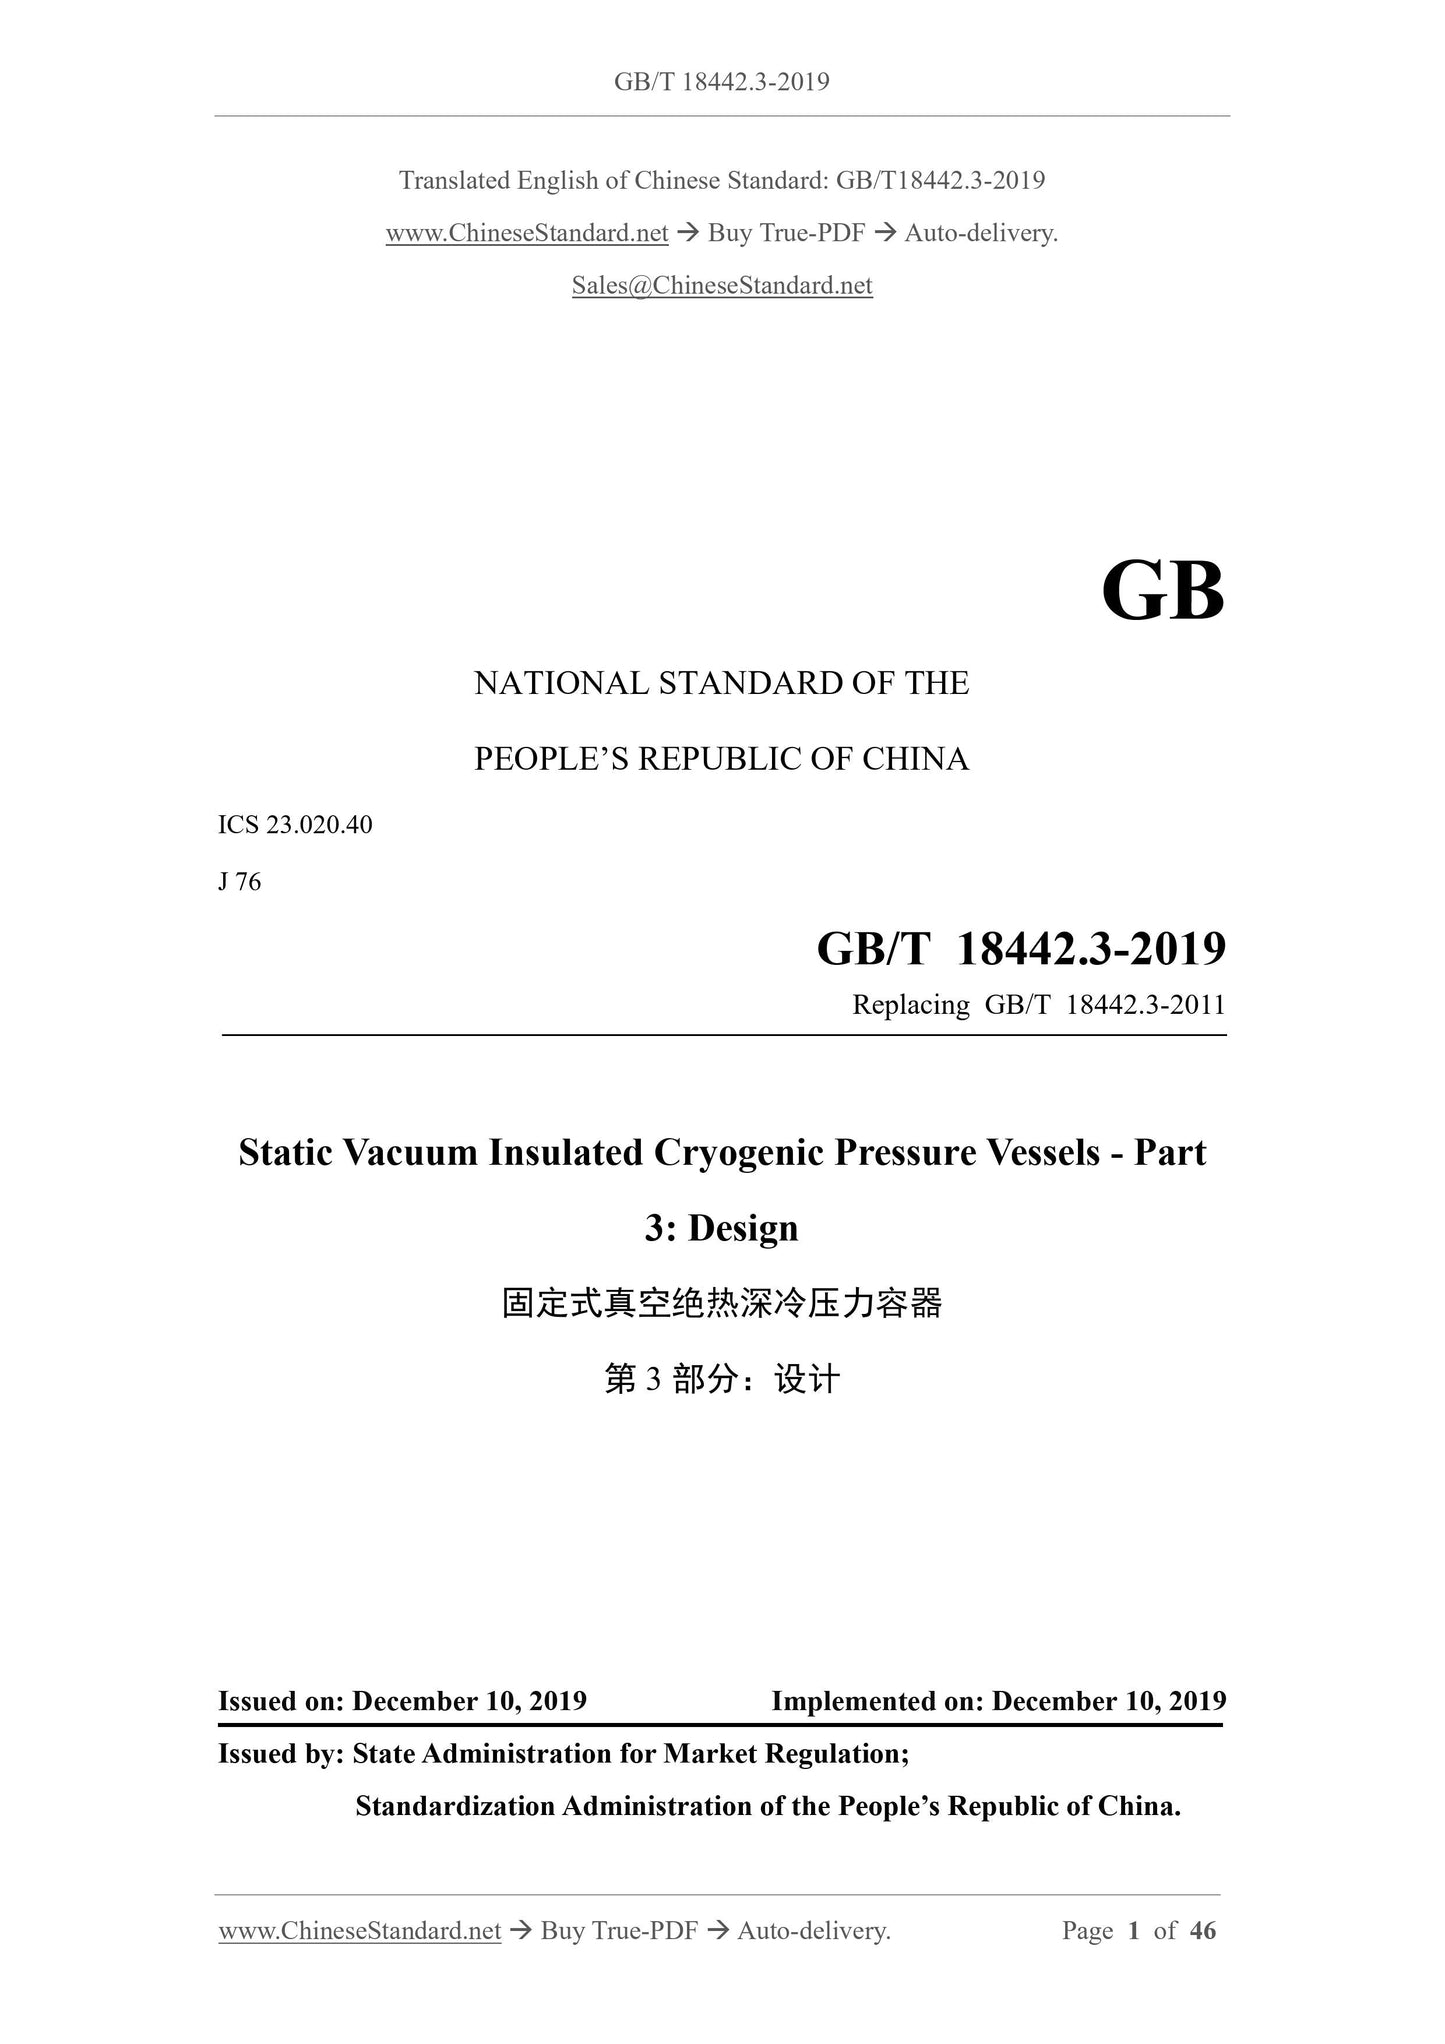 GB/T 18442.3-2019 Page 1